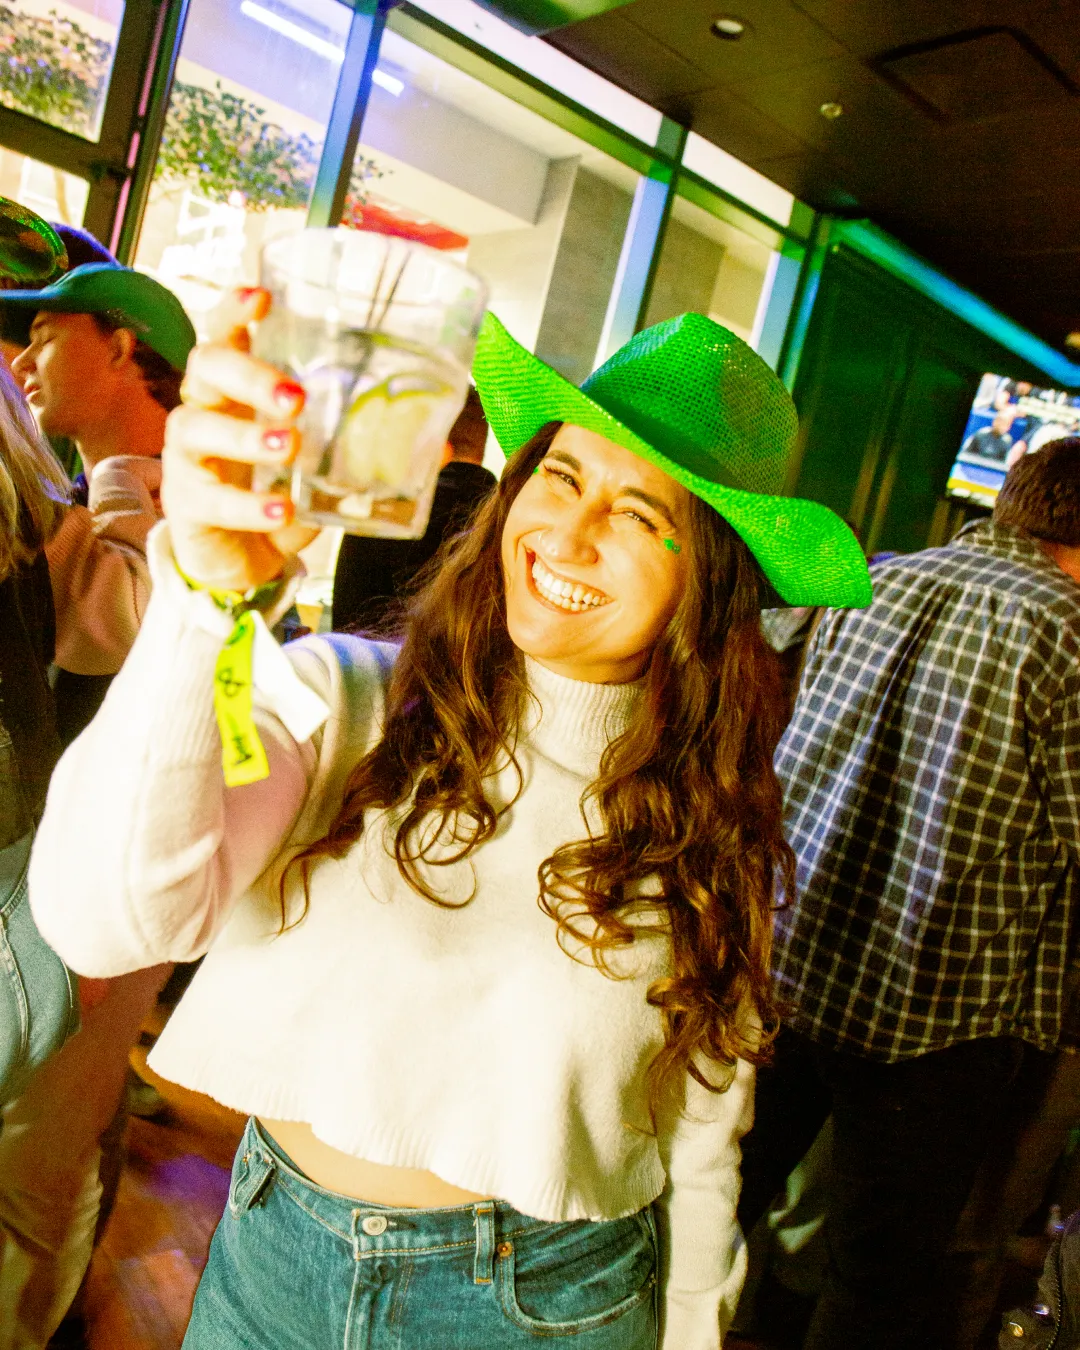 Warm-hearted girl in green, toasting to the Irish during the St Patricks bar crawl